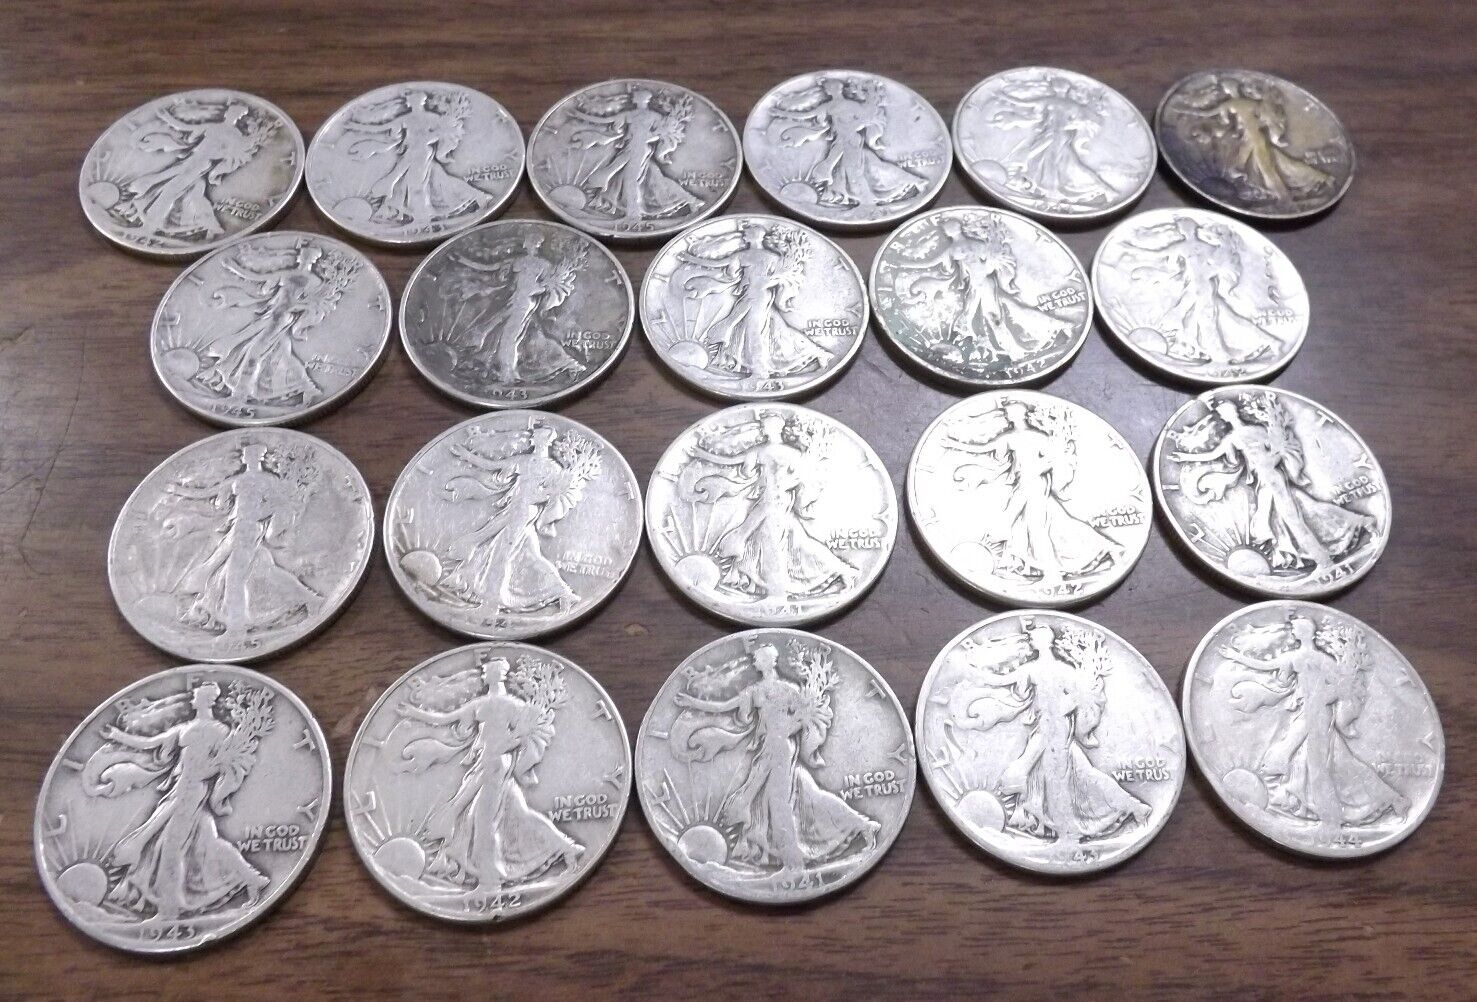 G-VF Baker’s Roll Collection of 21 Walking Liberty Half Dollars 1941-45 90% Silver